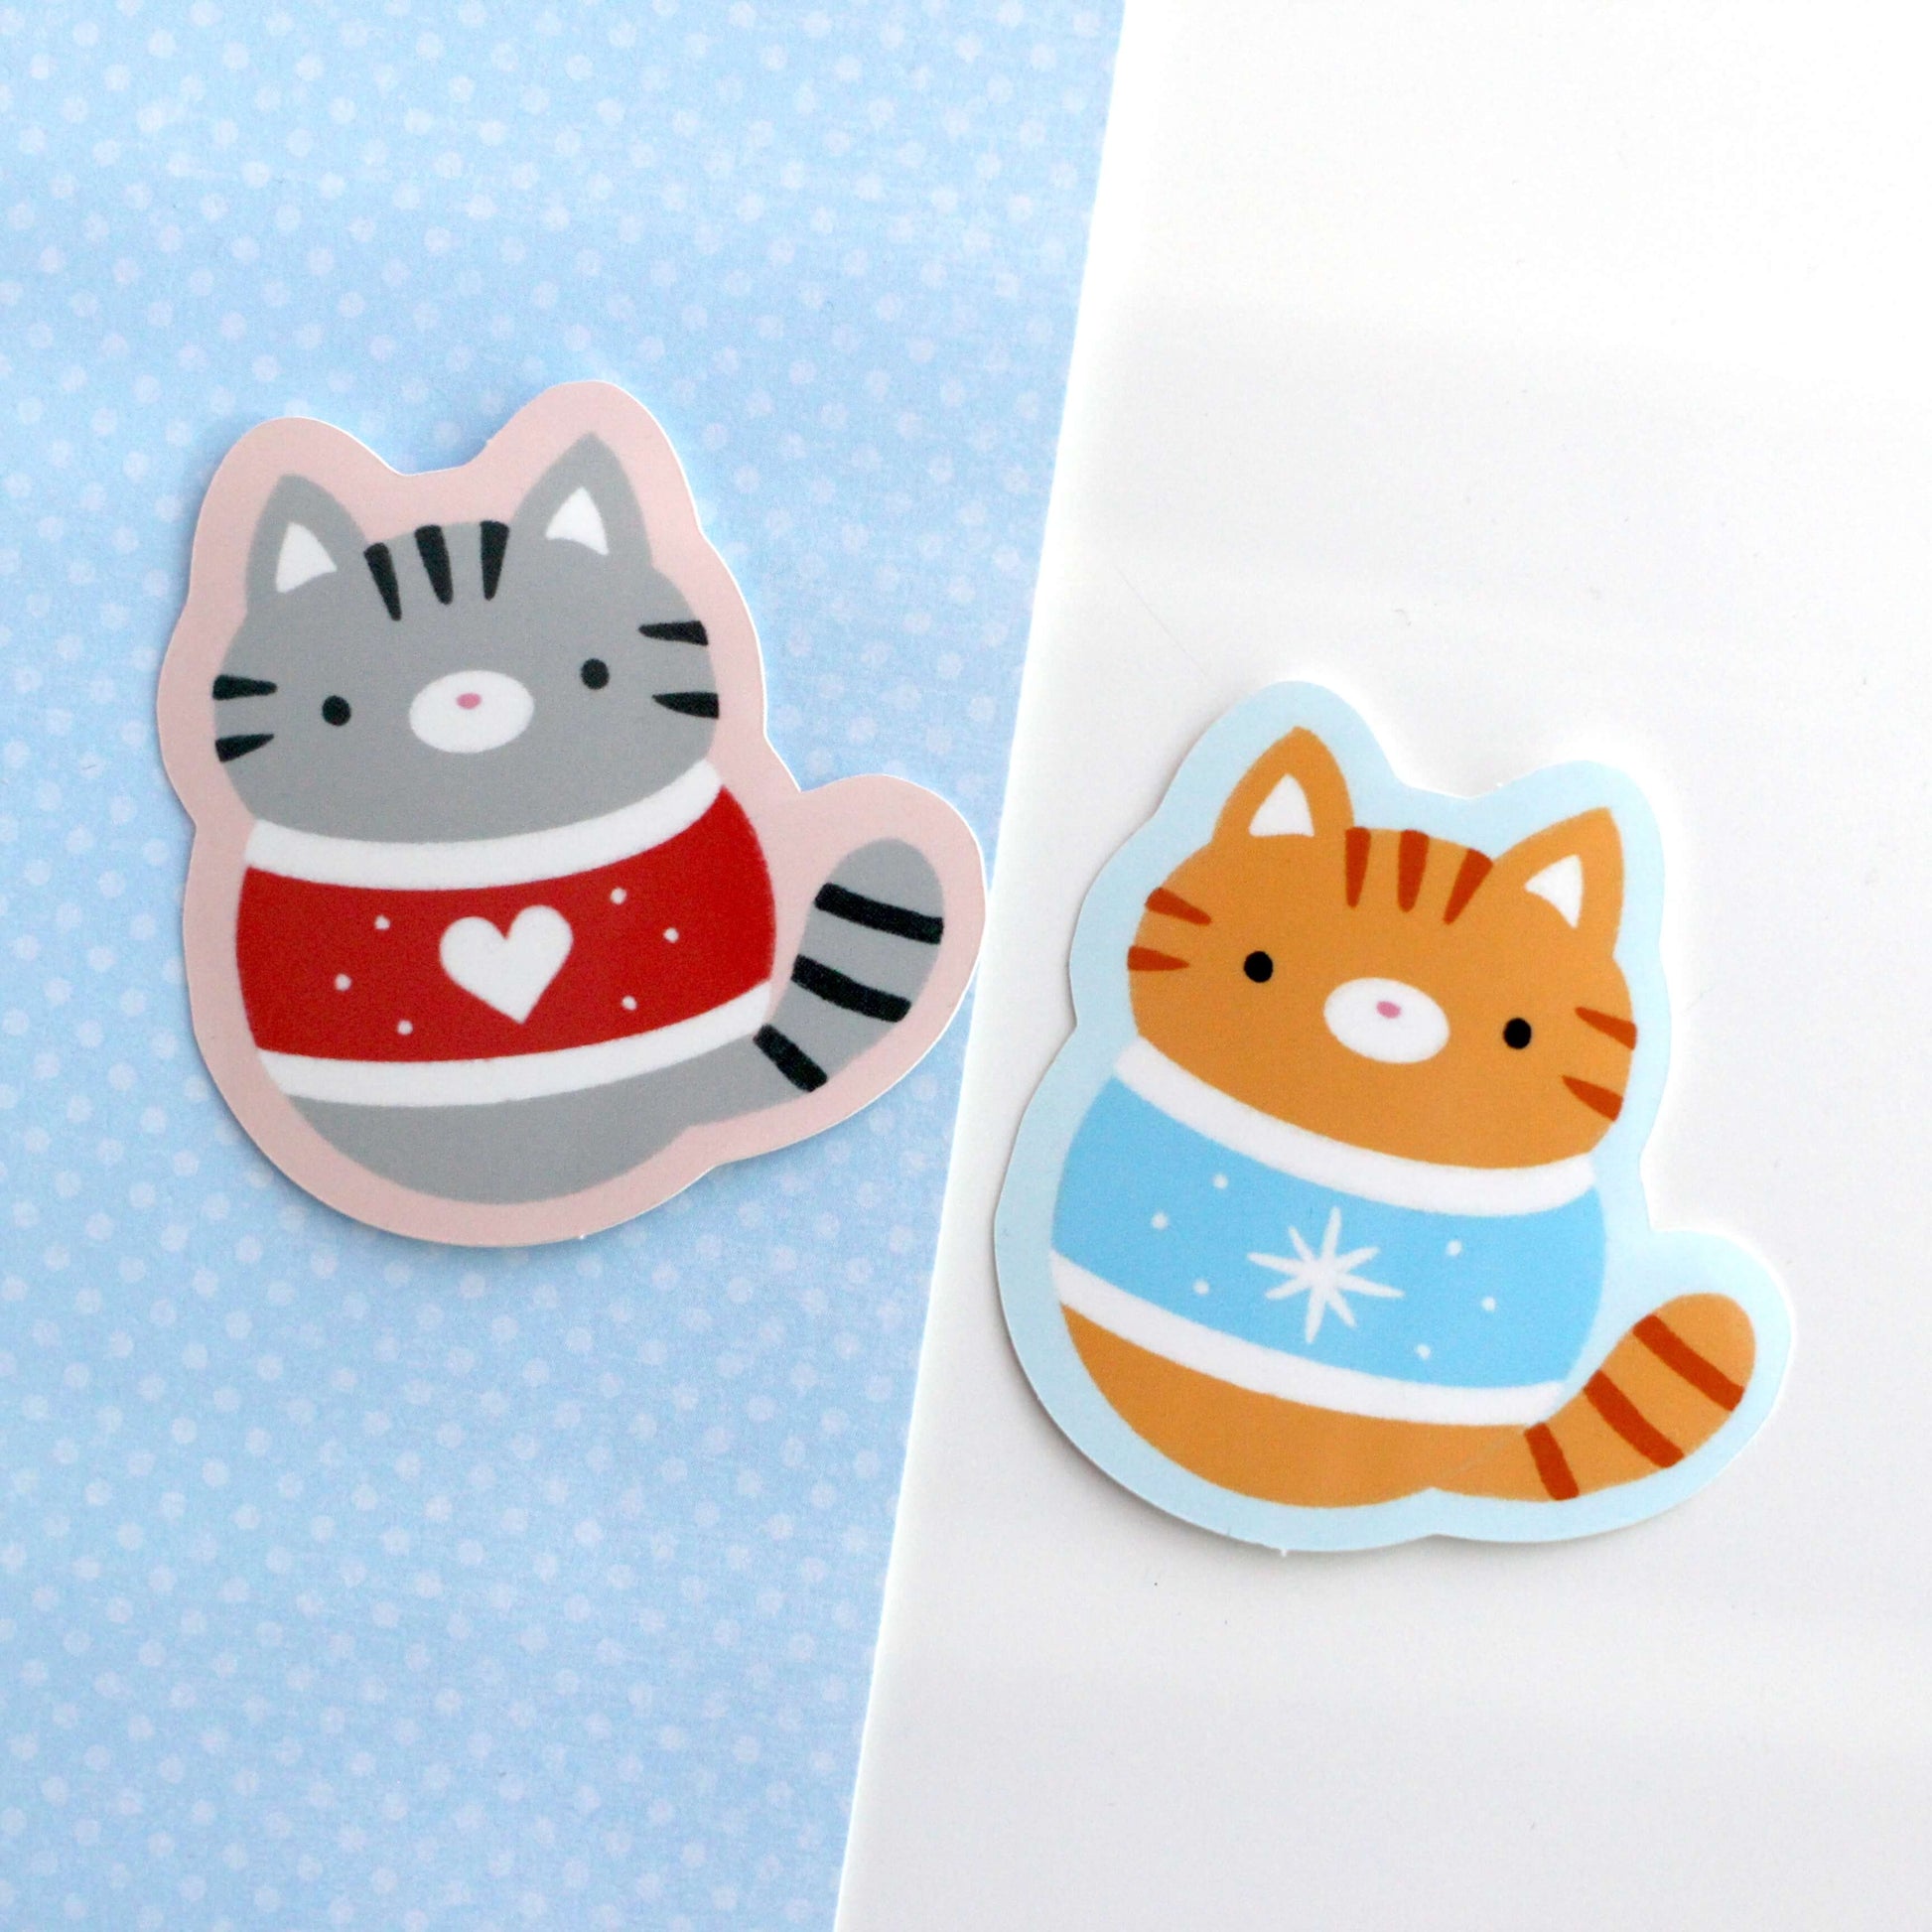 Christmas Sweater Cats Glossy Vinyl Stickers - Orange and Grey Tabby Cat Decals: Set of 2 Stickers (one Grey and one Orange Cat)